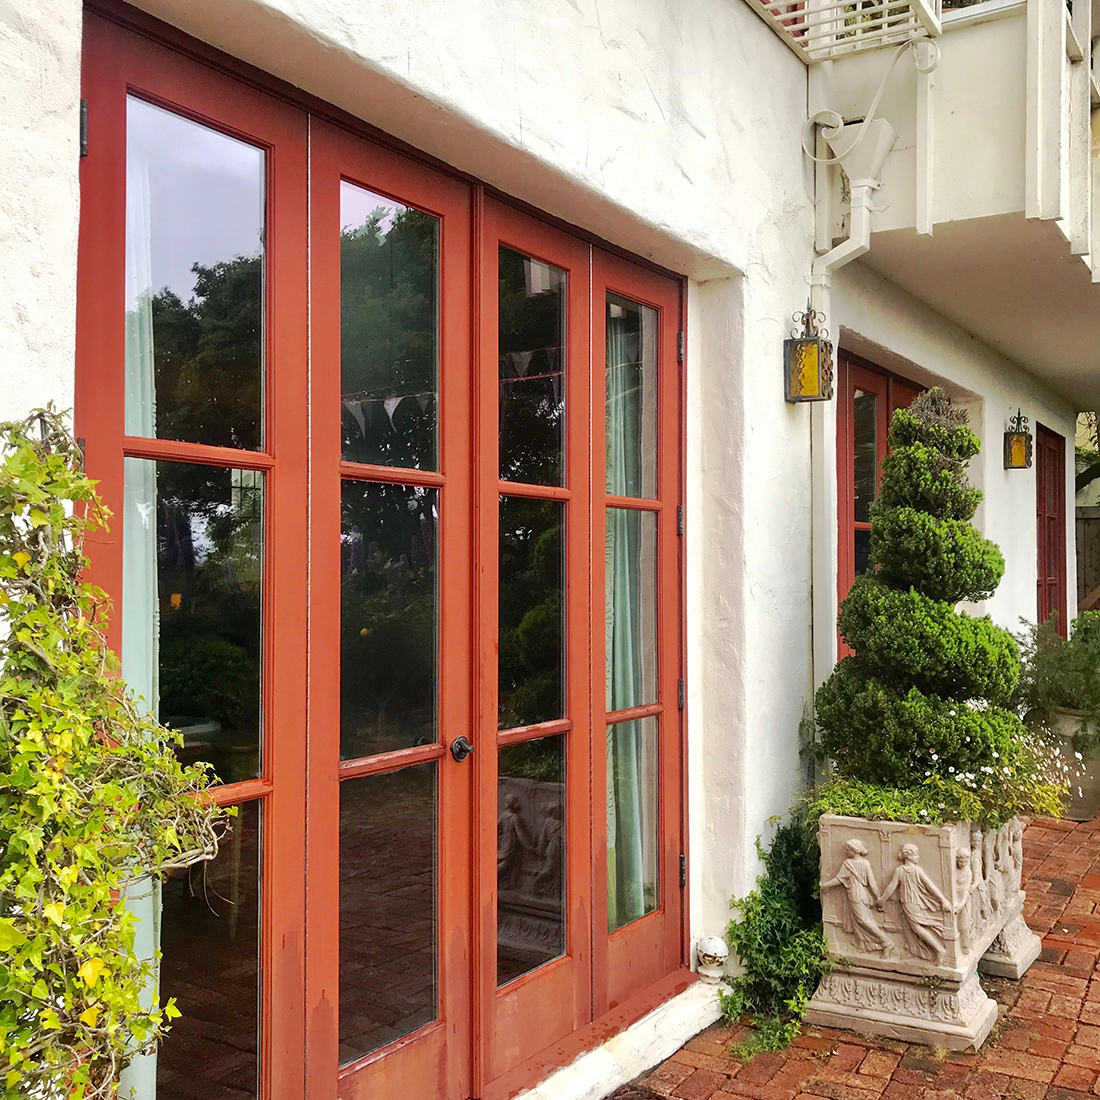 New bi-fold French doors will replace the old terrace doors with failing hardware and foggy glass panes.